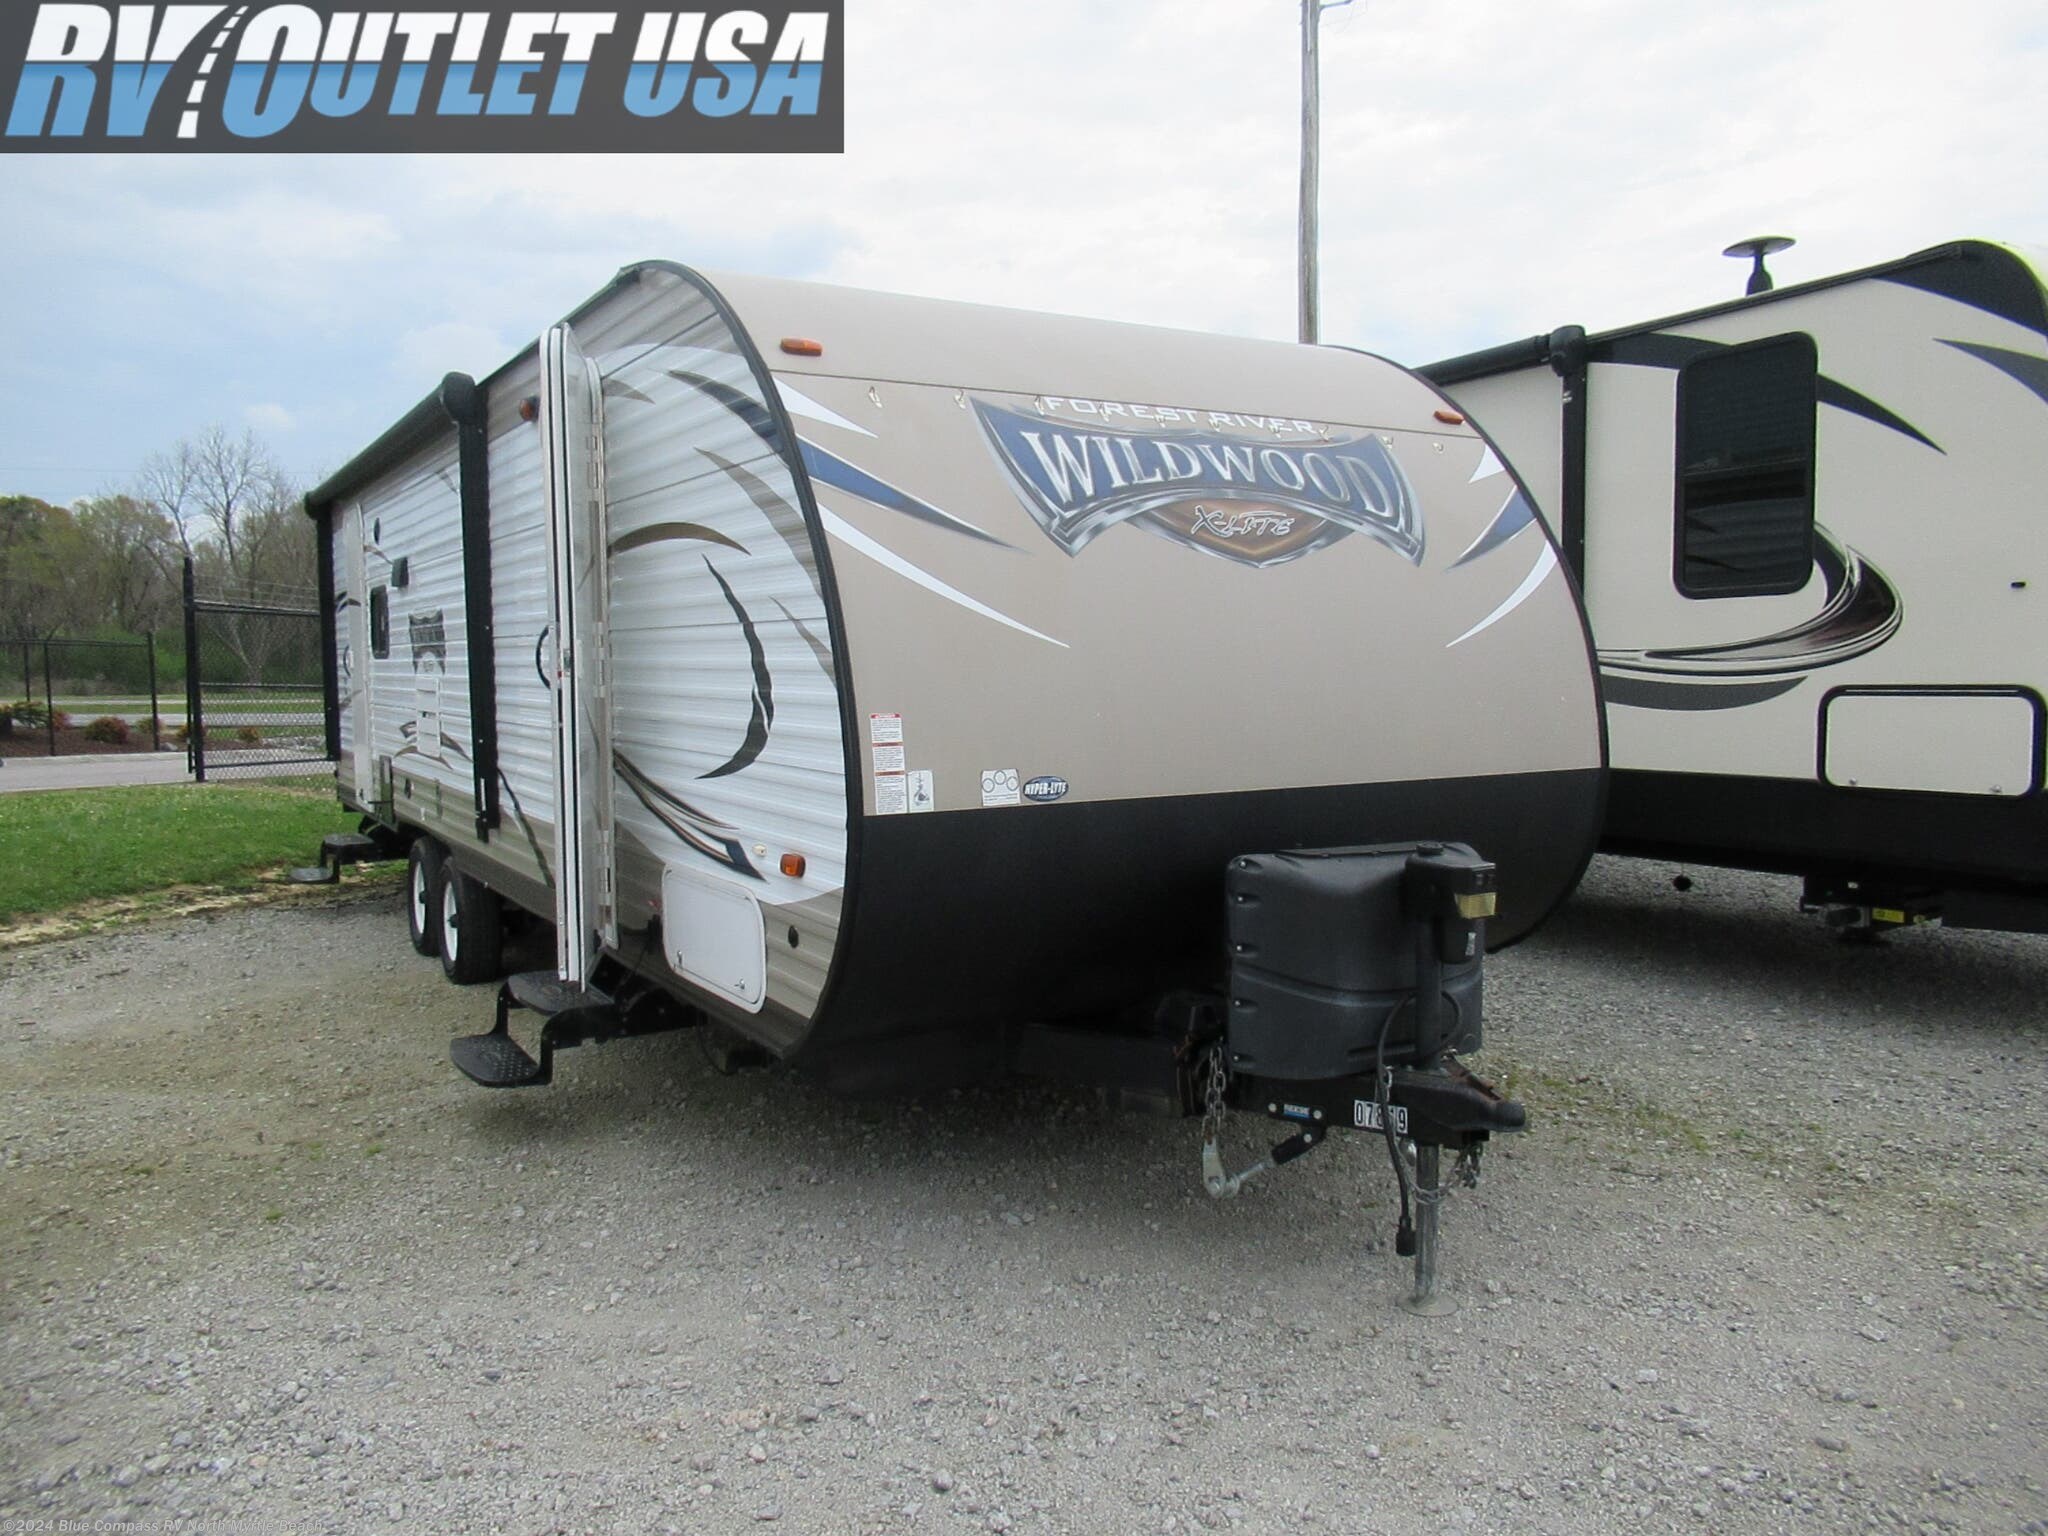 2017 Forest River Wildwood X-Lite 254RLXL RV for Sale in Longs, SC 29568 | SCKA2093A | RVUSA.com 2017 Forest River Wildwood X Lite 254rlxl